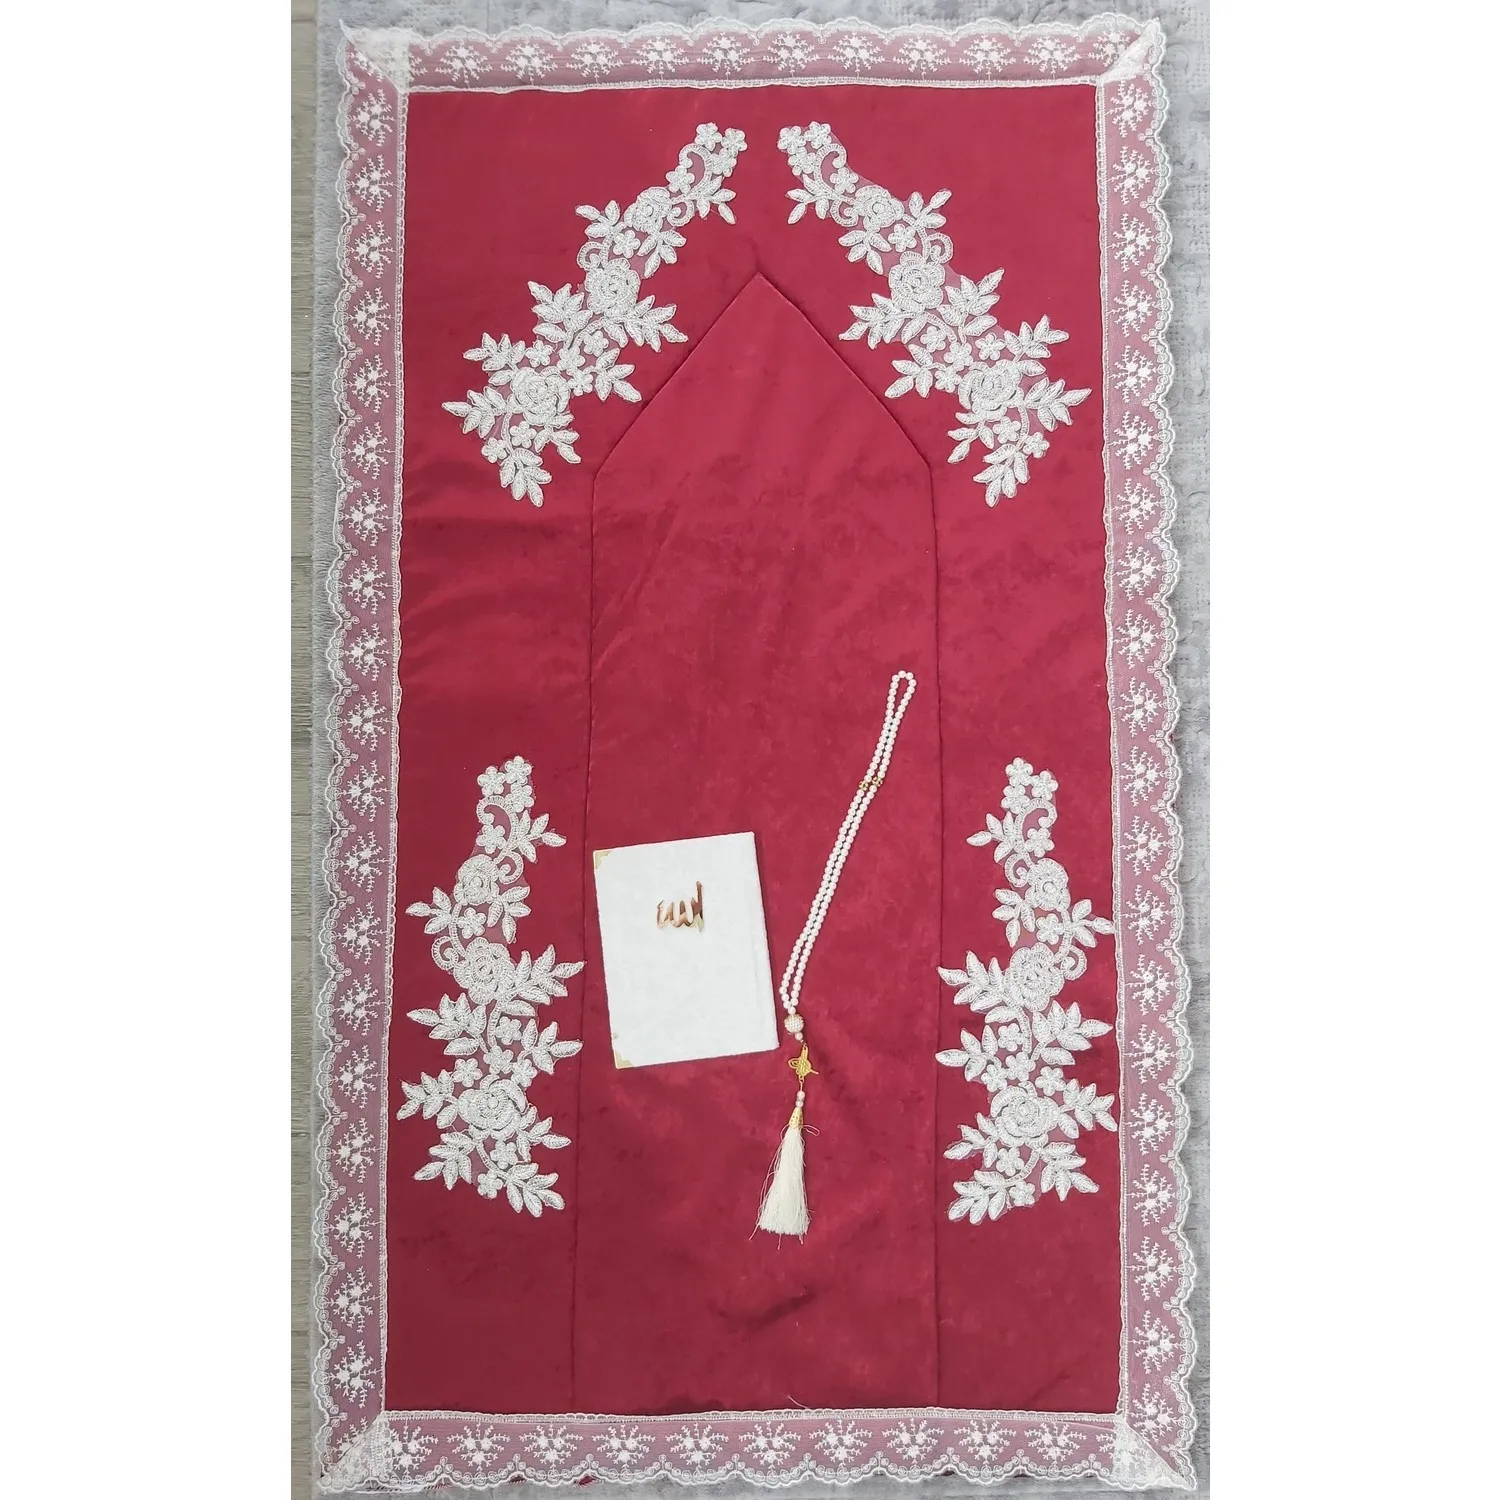 GREAT GIFT Claret Red French Lace Velvet Prayer Rug Dowry Bundle Set 3 Pcs   MUSLIM PRAYER COVER EASY TO USE   FREE SHİPPİNG